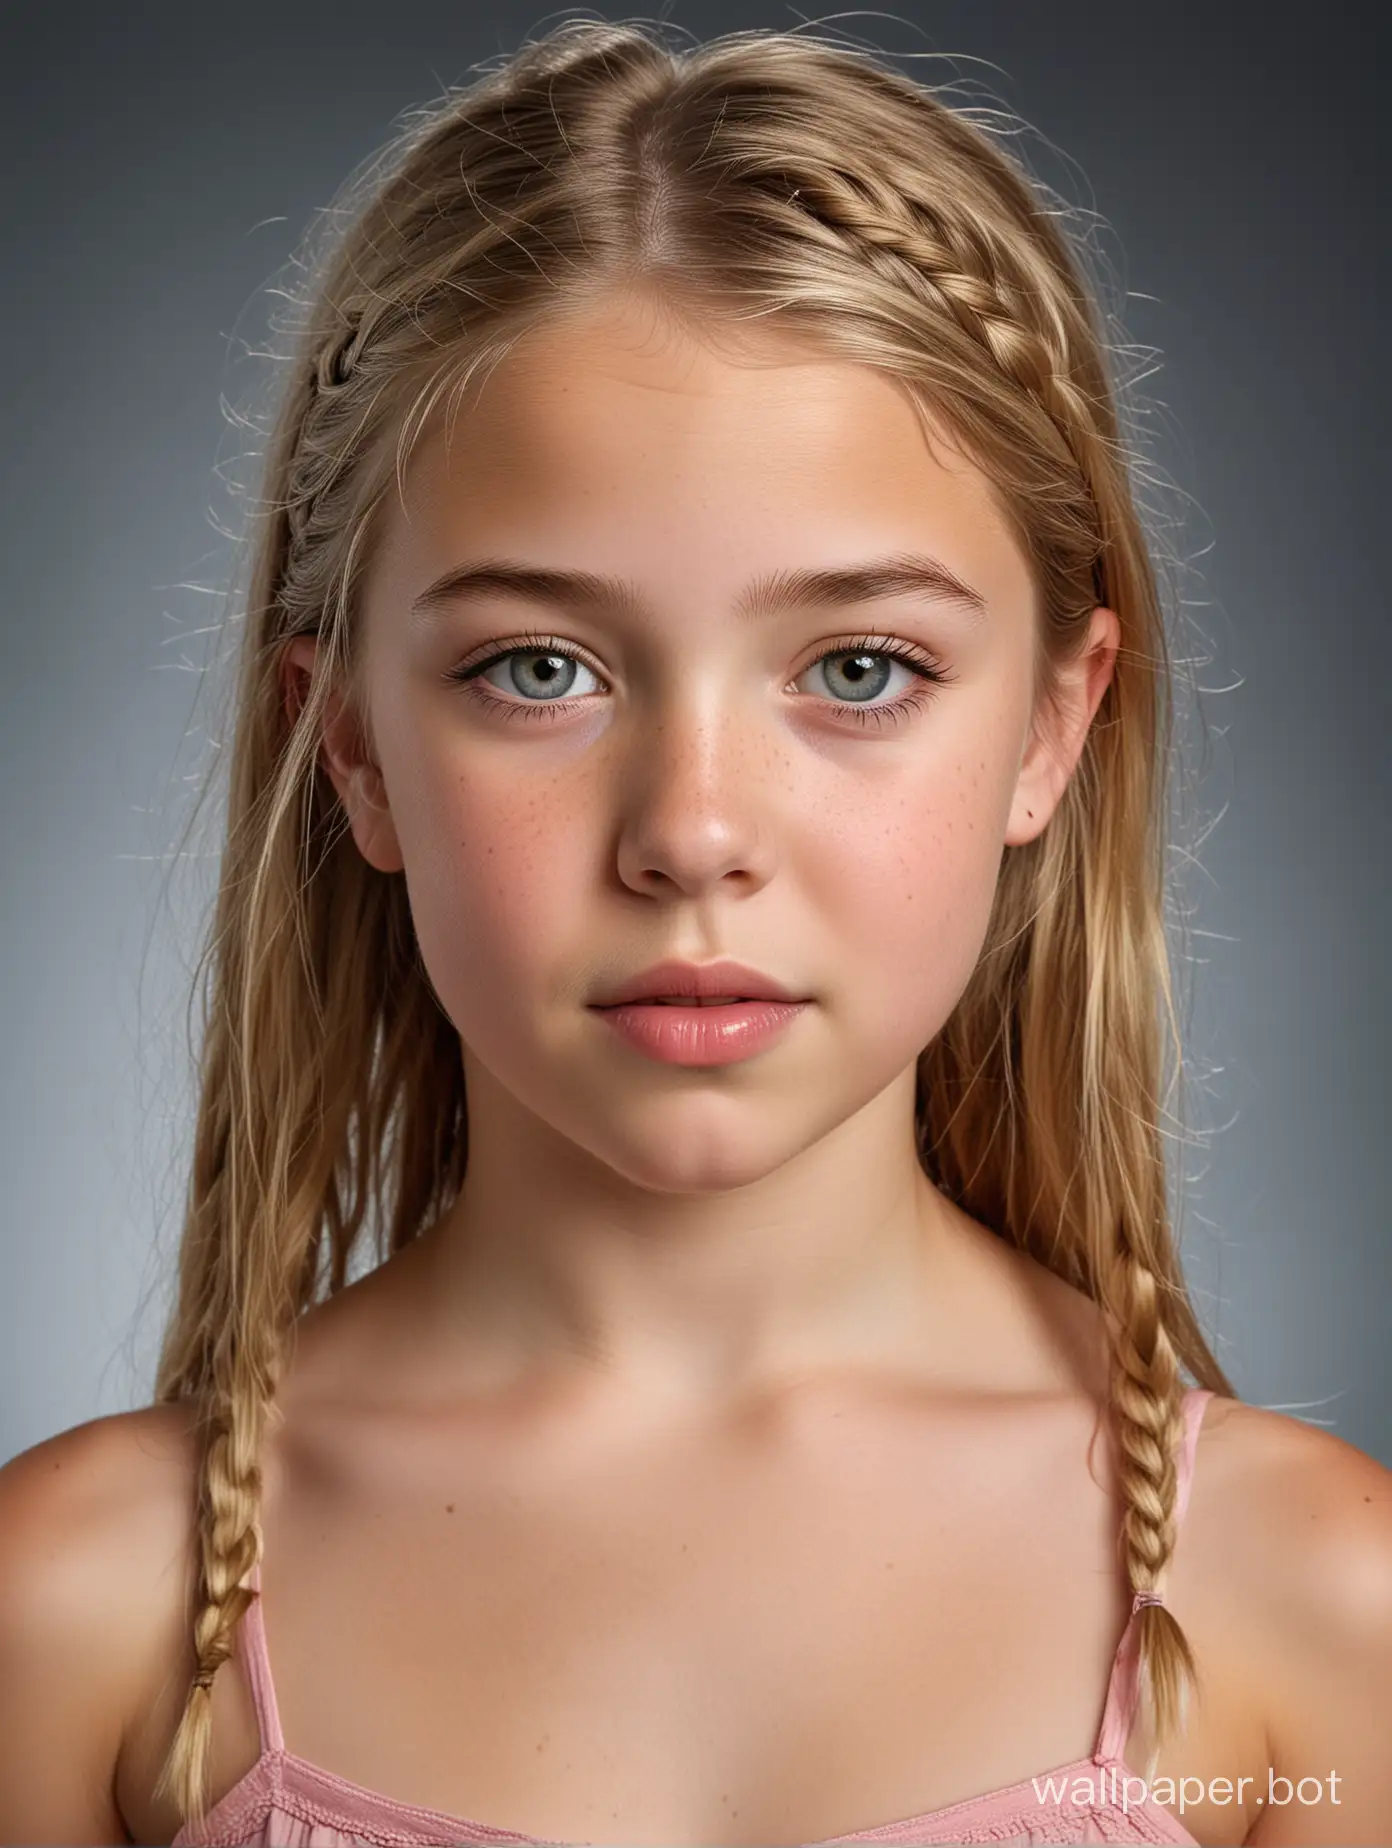 Professional studio portrait photograph with the most intricate detail. A beautiful little 10 year old preteen Caucasian girl. She has a perfect most gorgeous alluring little preteen child face, slight freckles, blonde braided hair. She looks almost engelic in her beauty. Serious surprised expression. She has a perfect little preteen child body, short stocky stature, tiniest little flat undeveloped preteen child breasts, puffy nipples, slender waist, round broad hips, curvy thighs.